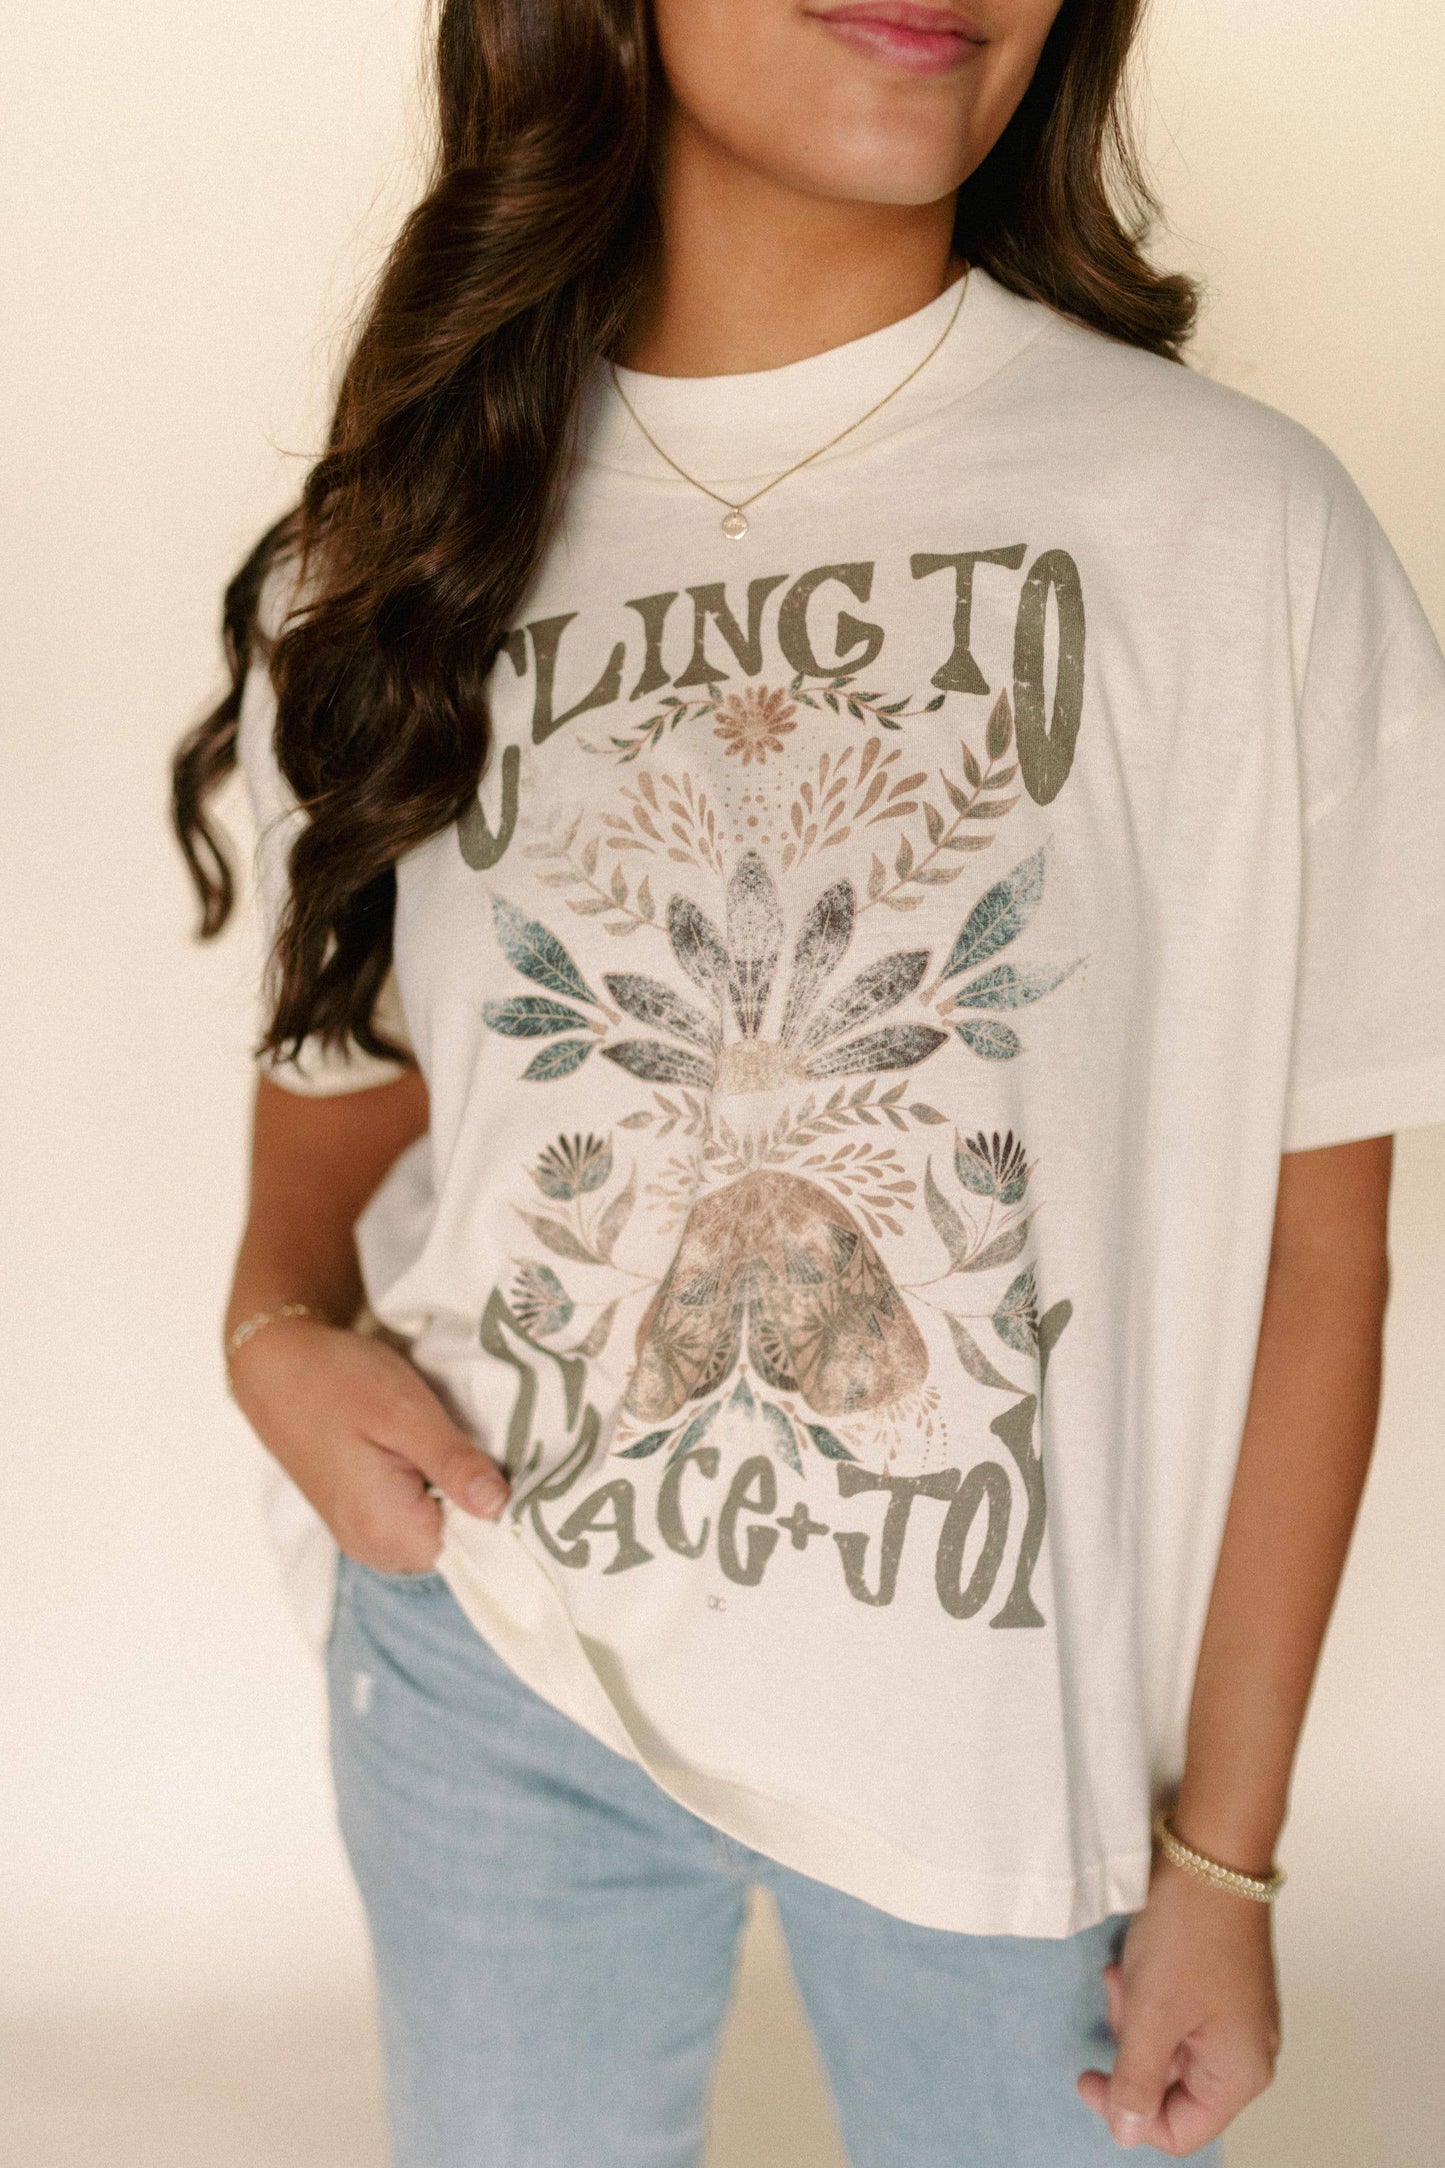 Cling to Grace & Joy Graphic Tee (S-2X)